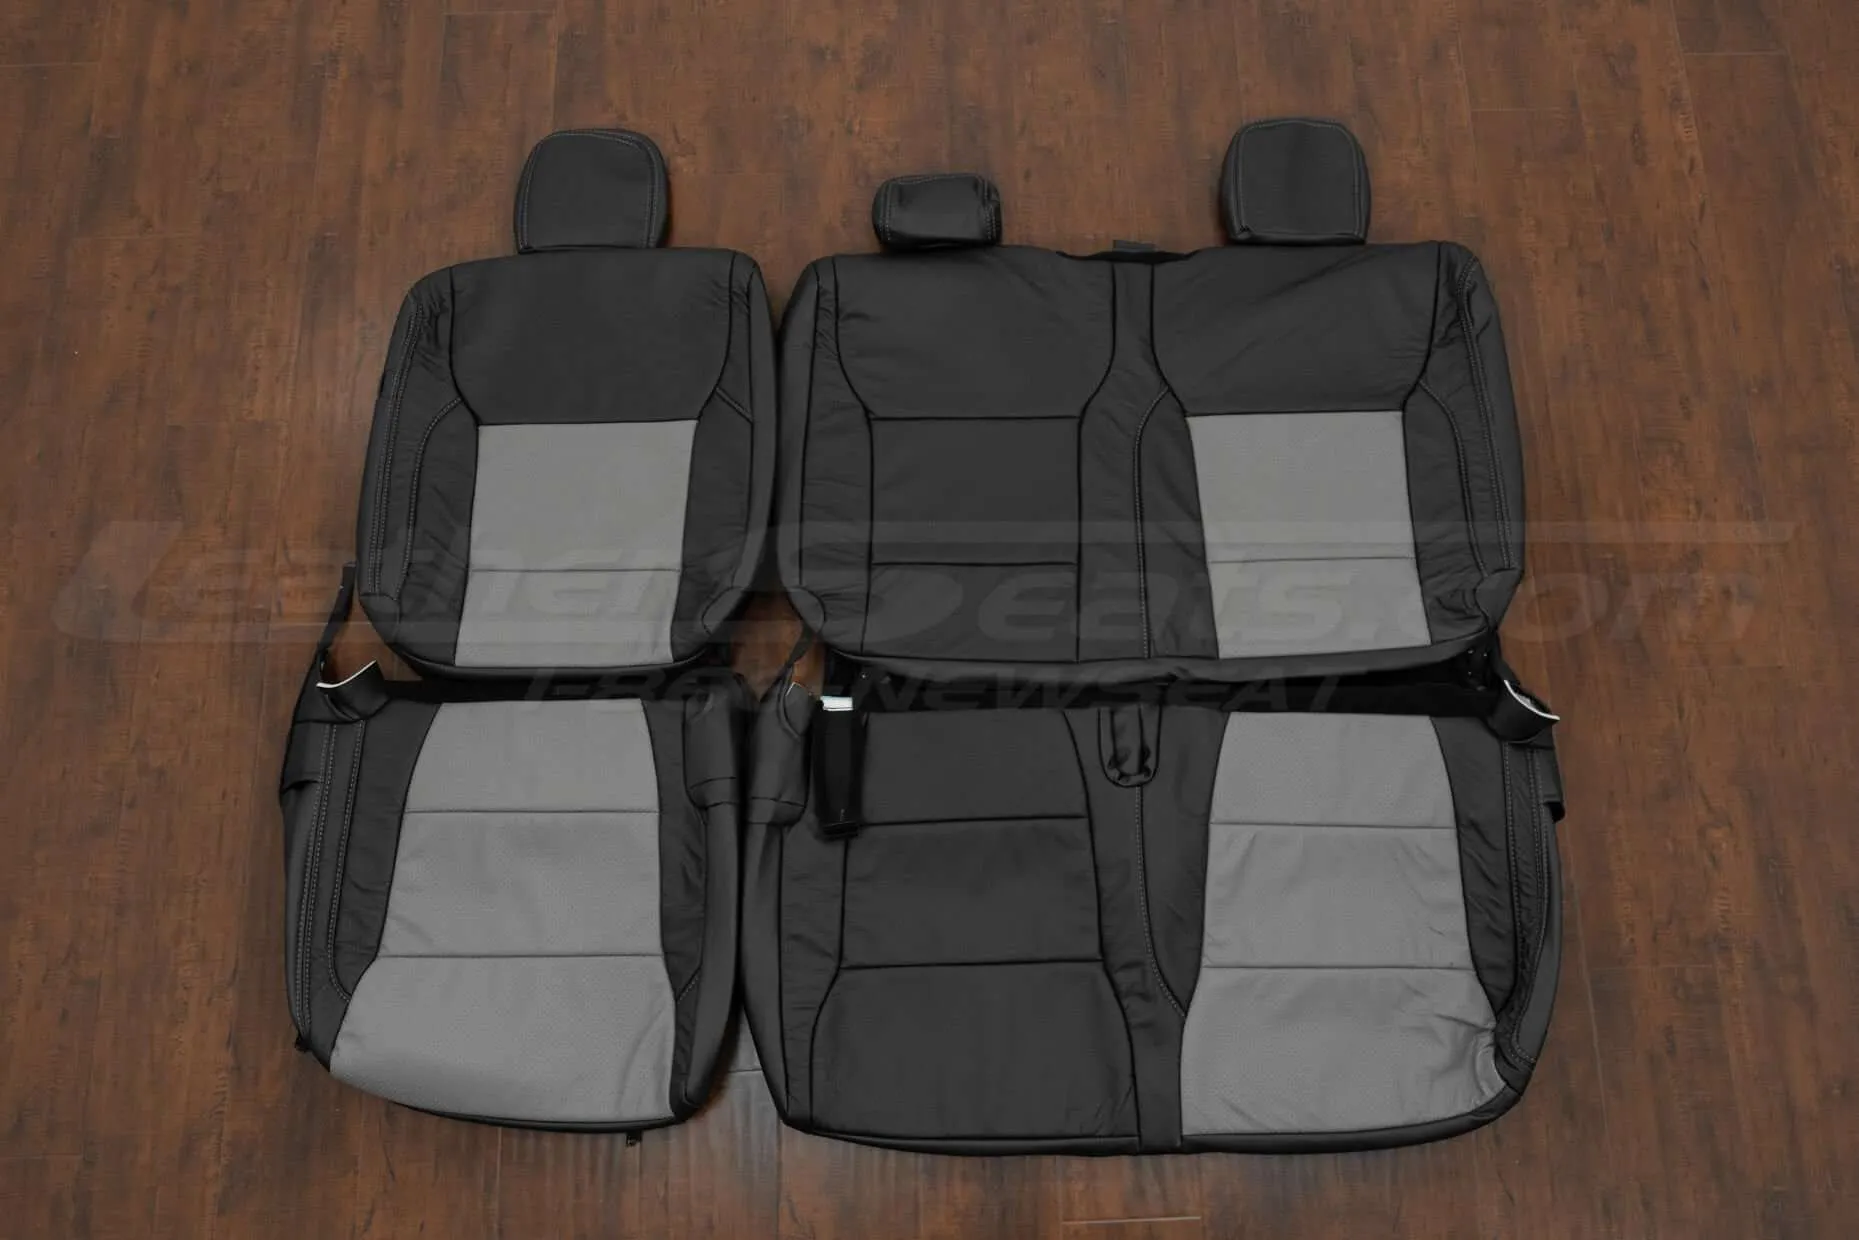 2021-2023 Ford F-150 Leather Seat Kit - Black/Stone - Rear seat uphlstery